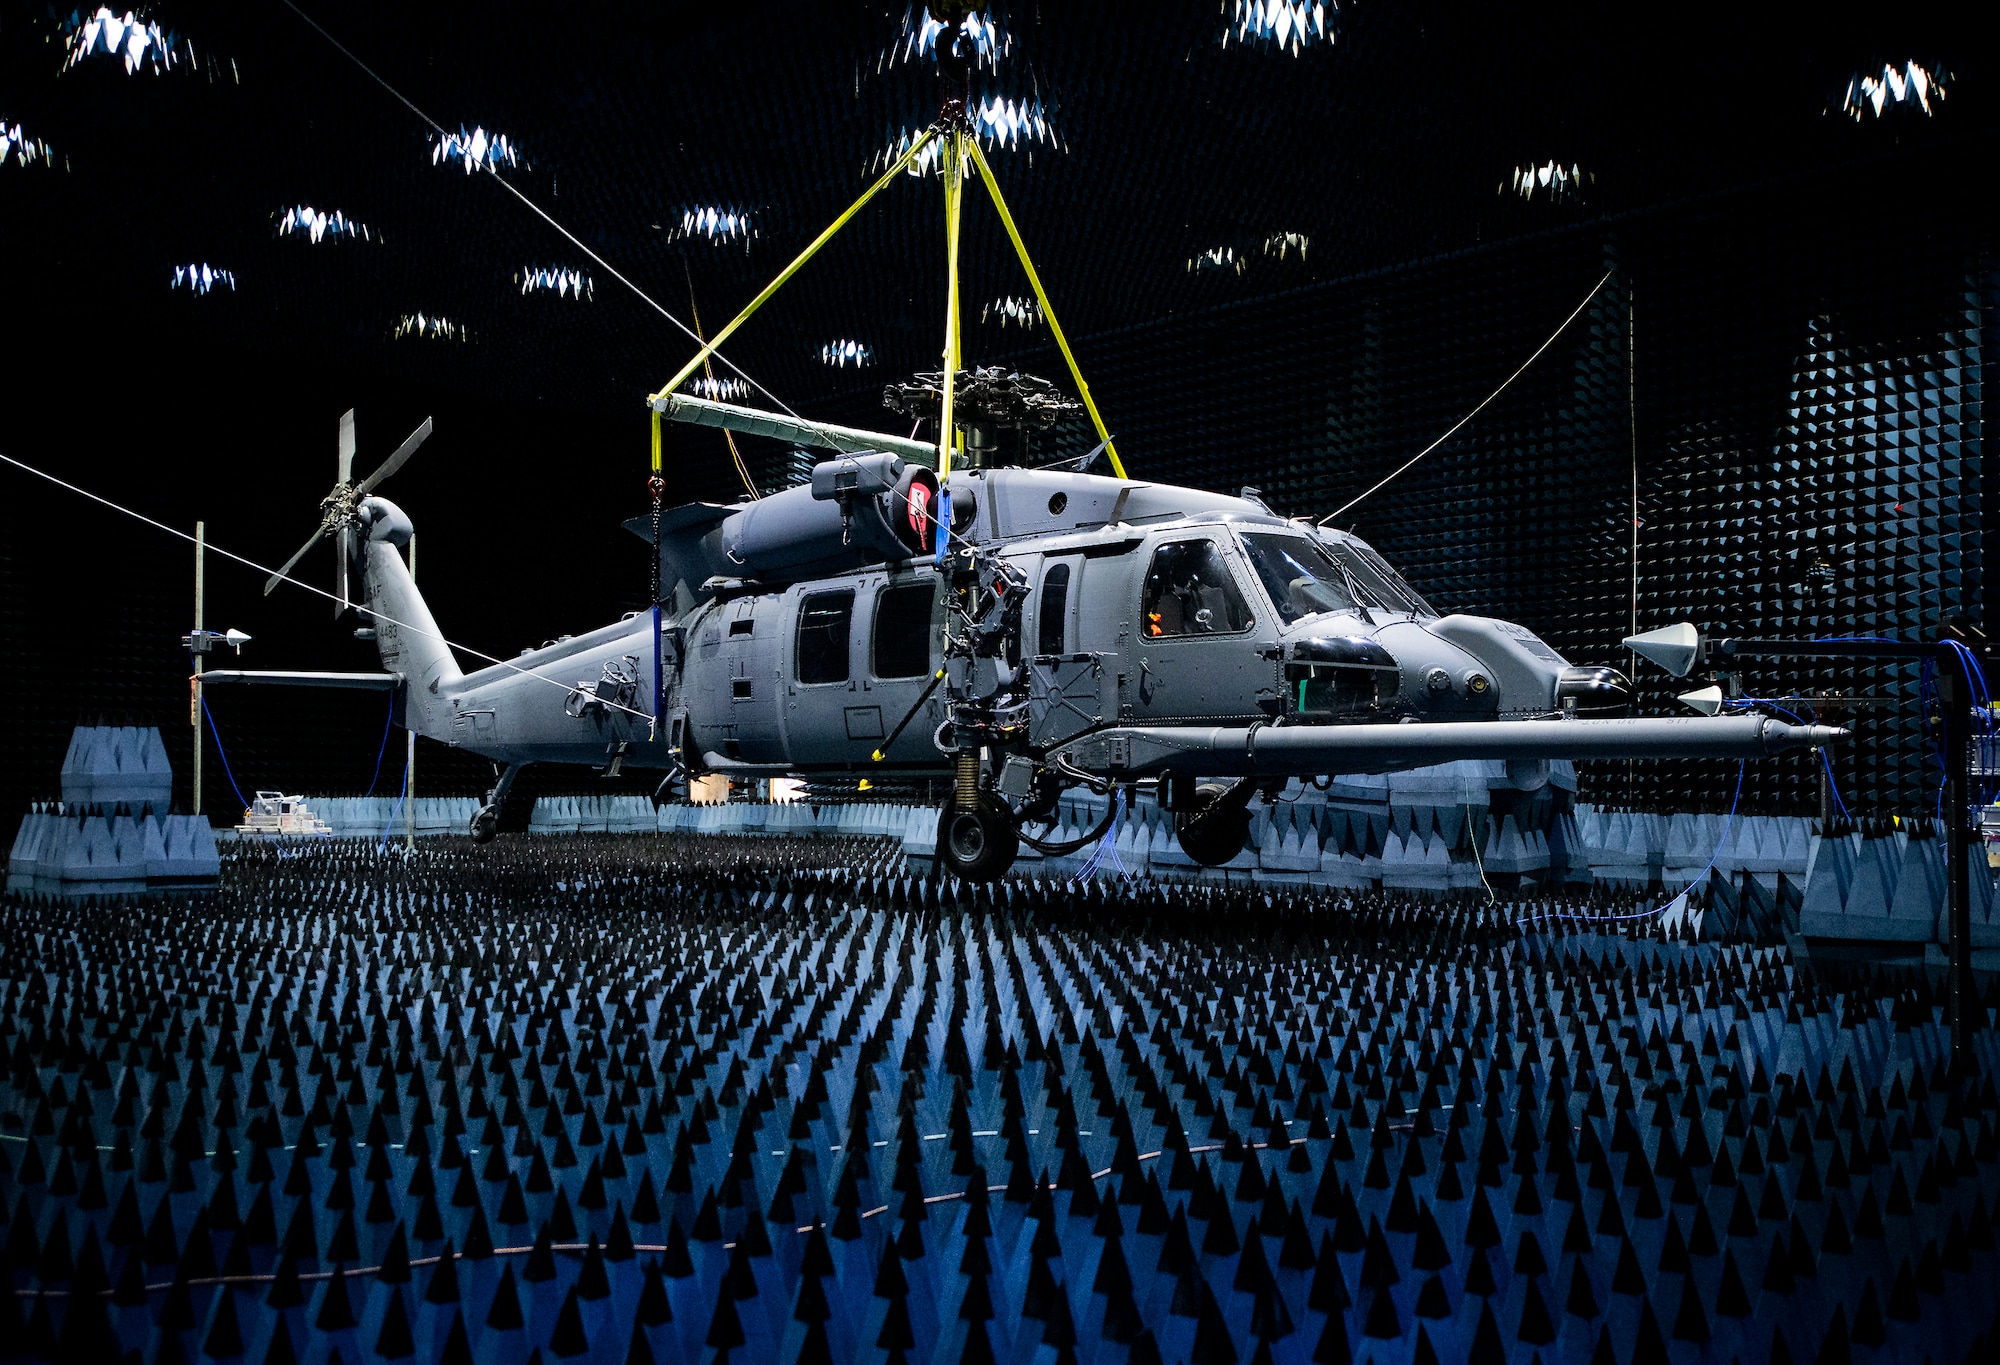 A 413th Flight Test Squadron HH-60W Pave Hawk hangs in the anechoic chamber at the Joint Preflight Integration of Munitions and Electronic Systems hangar, Jan. 6, 2020, at Eglin Air Force Base, Fla. The J-PRIMES anechoic chamber is a room designed to stop internal reflections of electromagnetic waves, as well as insulate from external sources of electromagnetic noise.